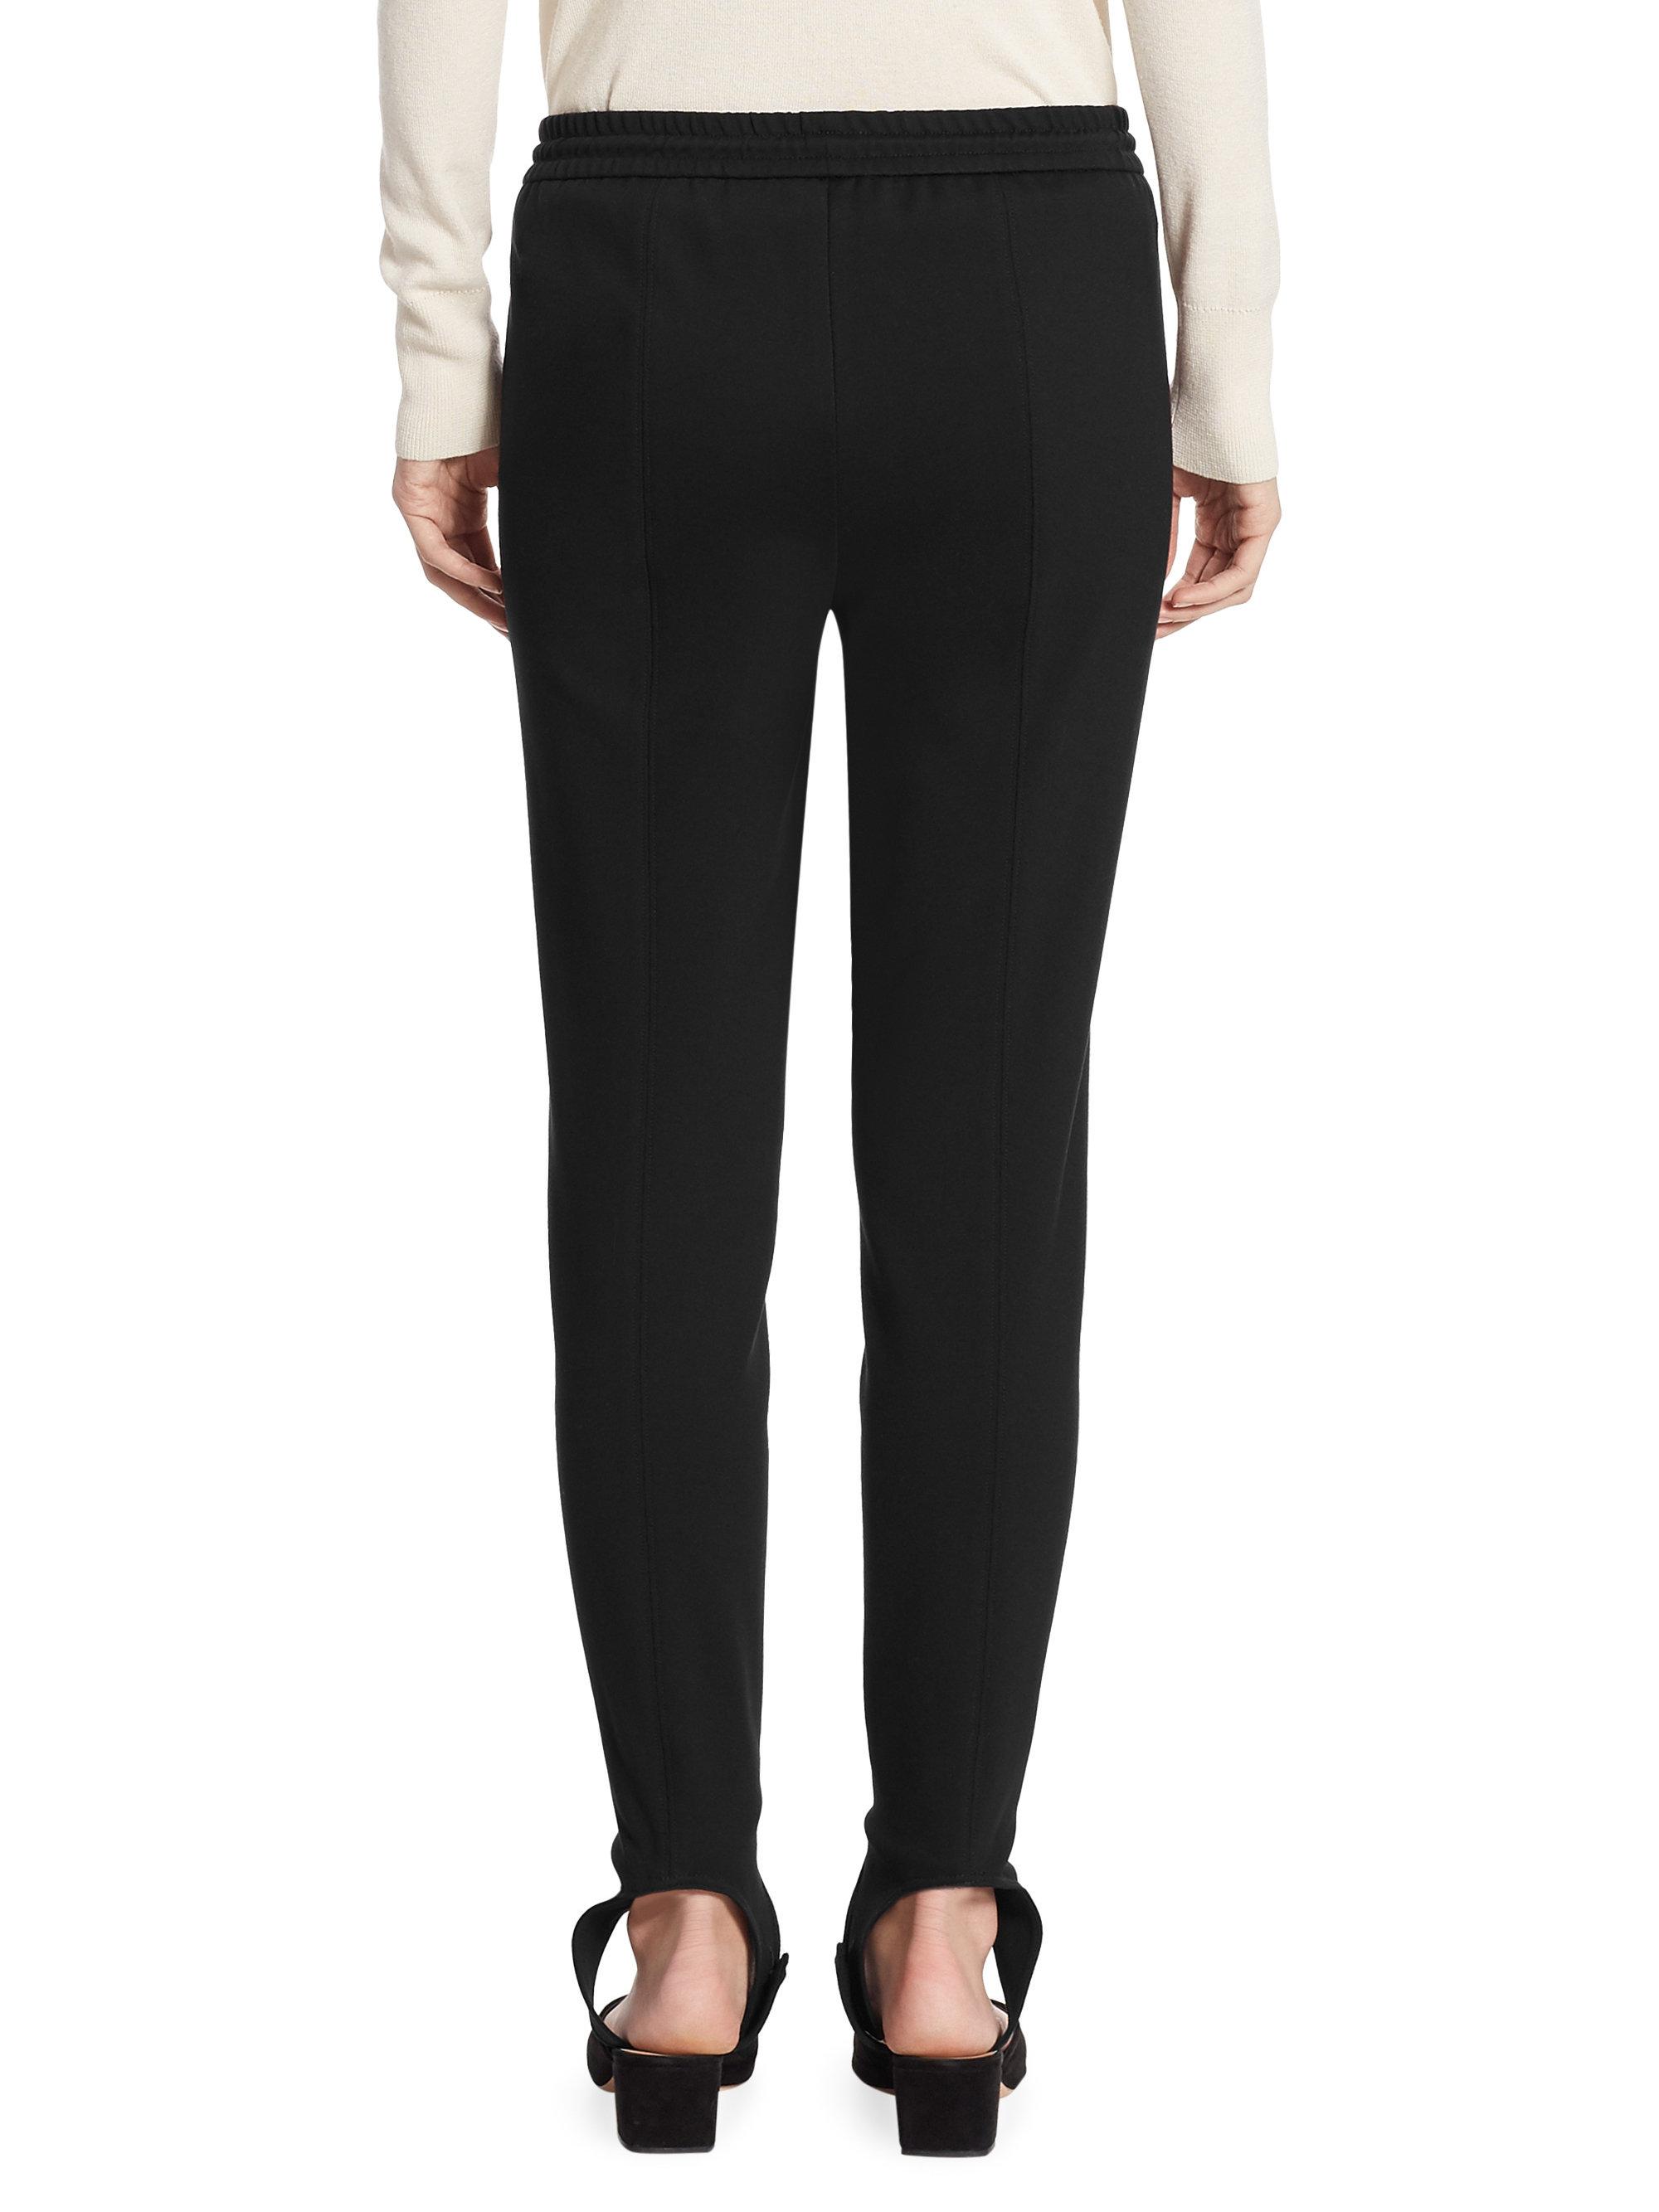 Lyst - Theory Pull-on Stirrup Pants in Black